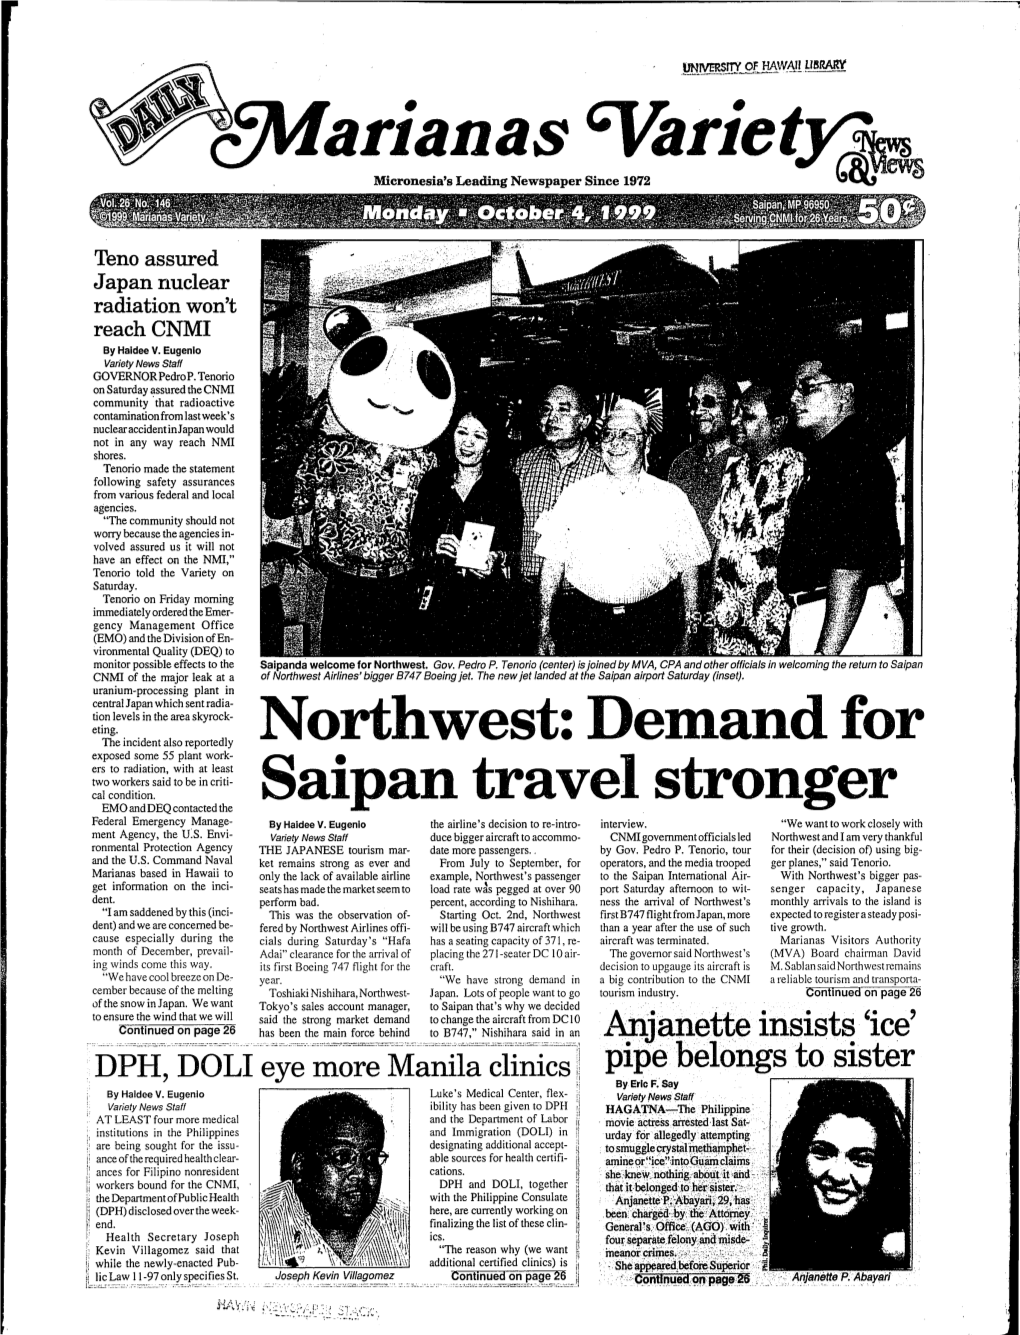 Dem.And for Saipan Travel Stronger